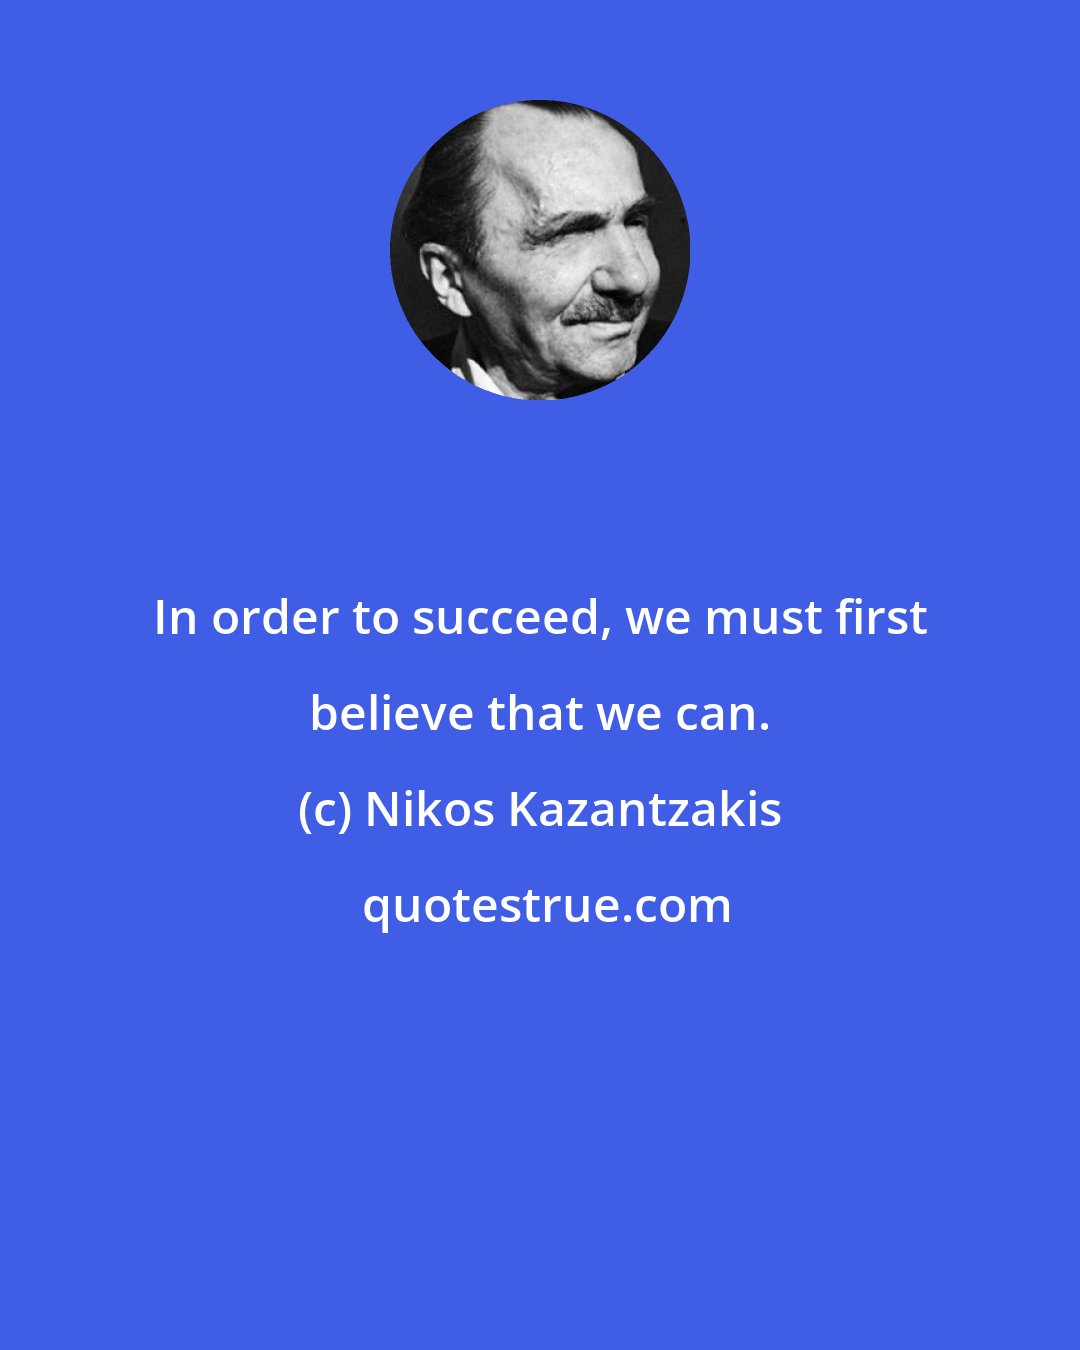 Nikos Kazantzakis: In order to succeed, we must first believe that we can.